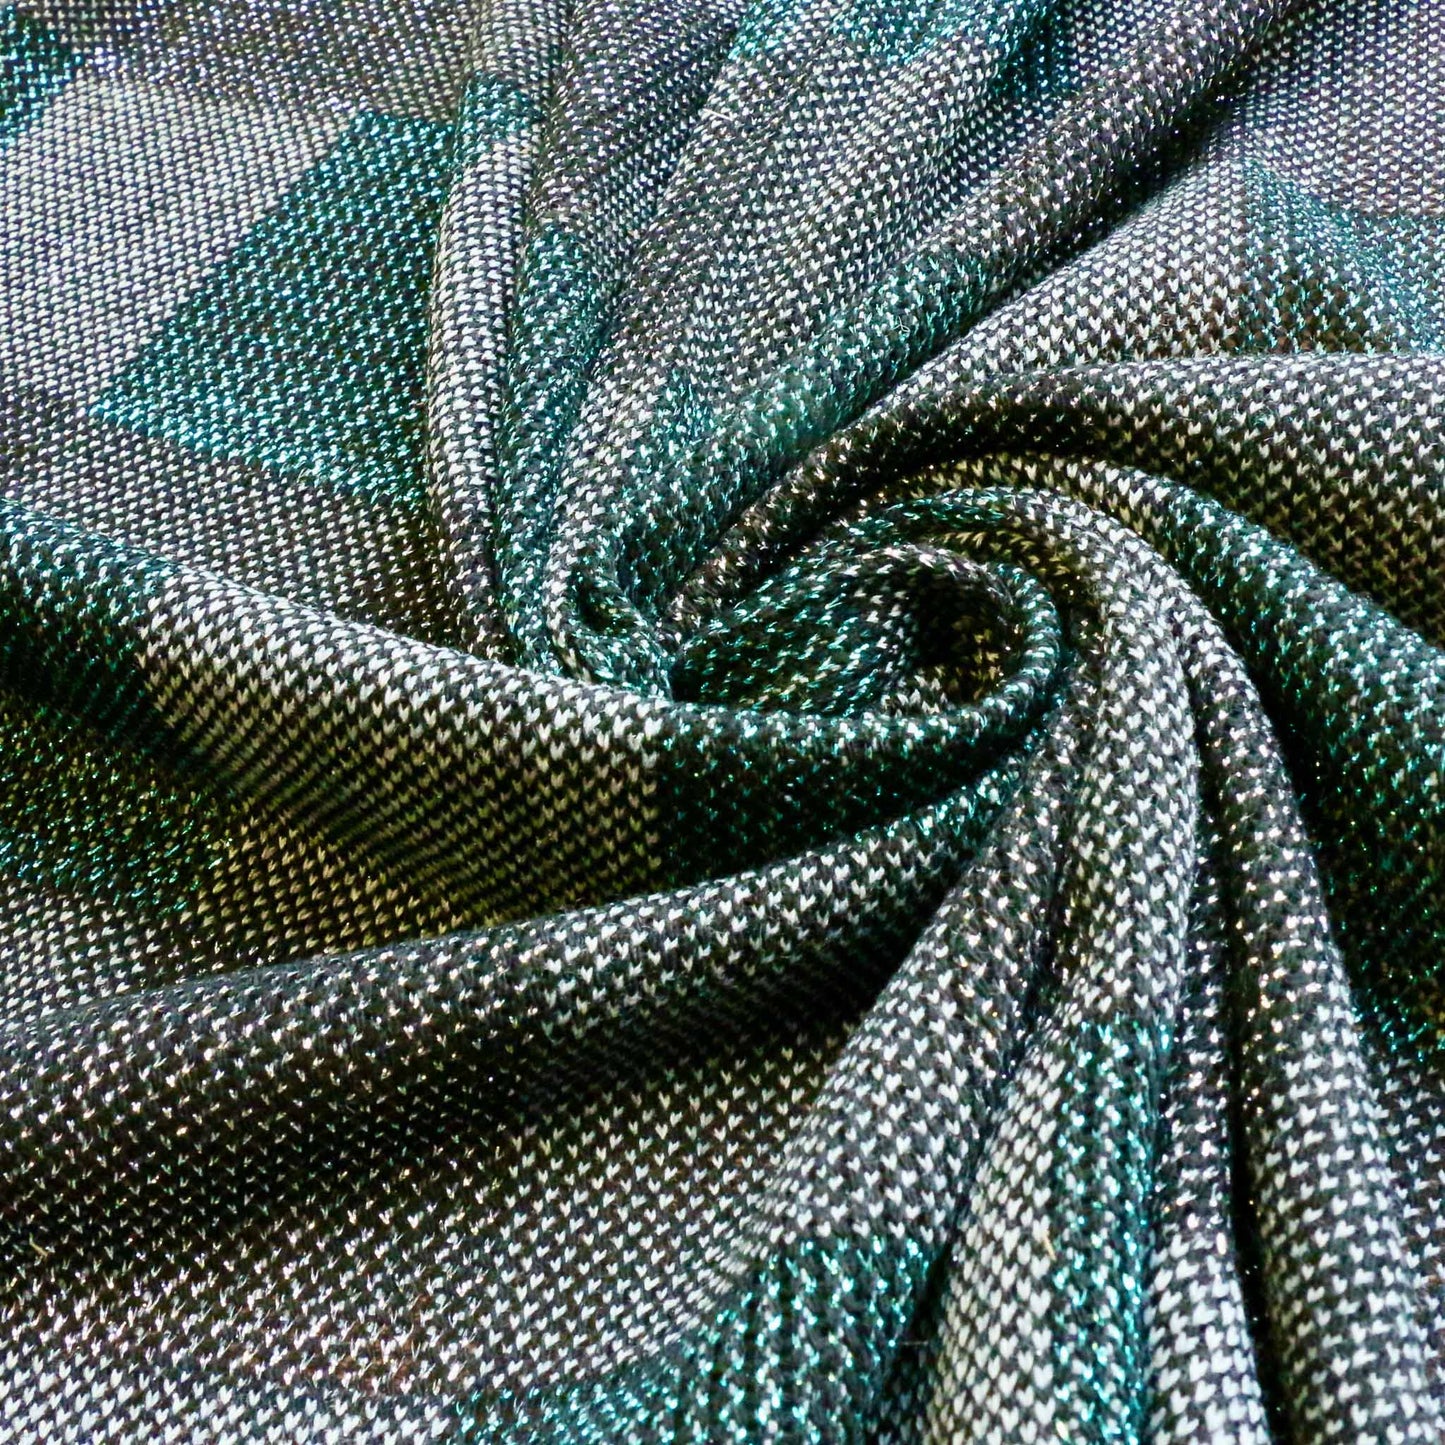 jersey knit dressmaking fabric with turquoise and black check pattern